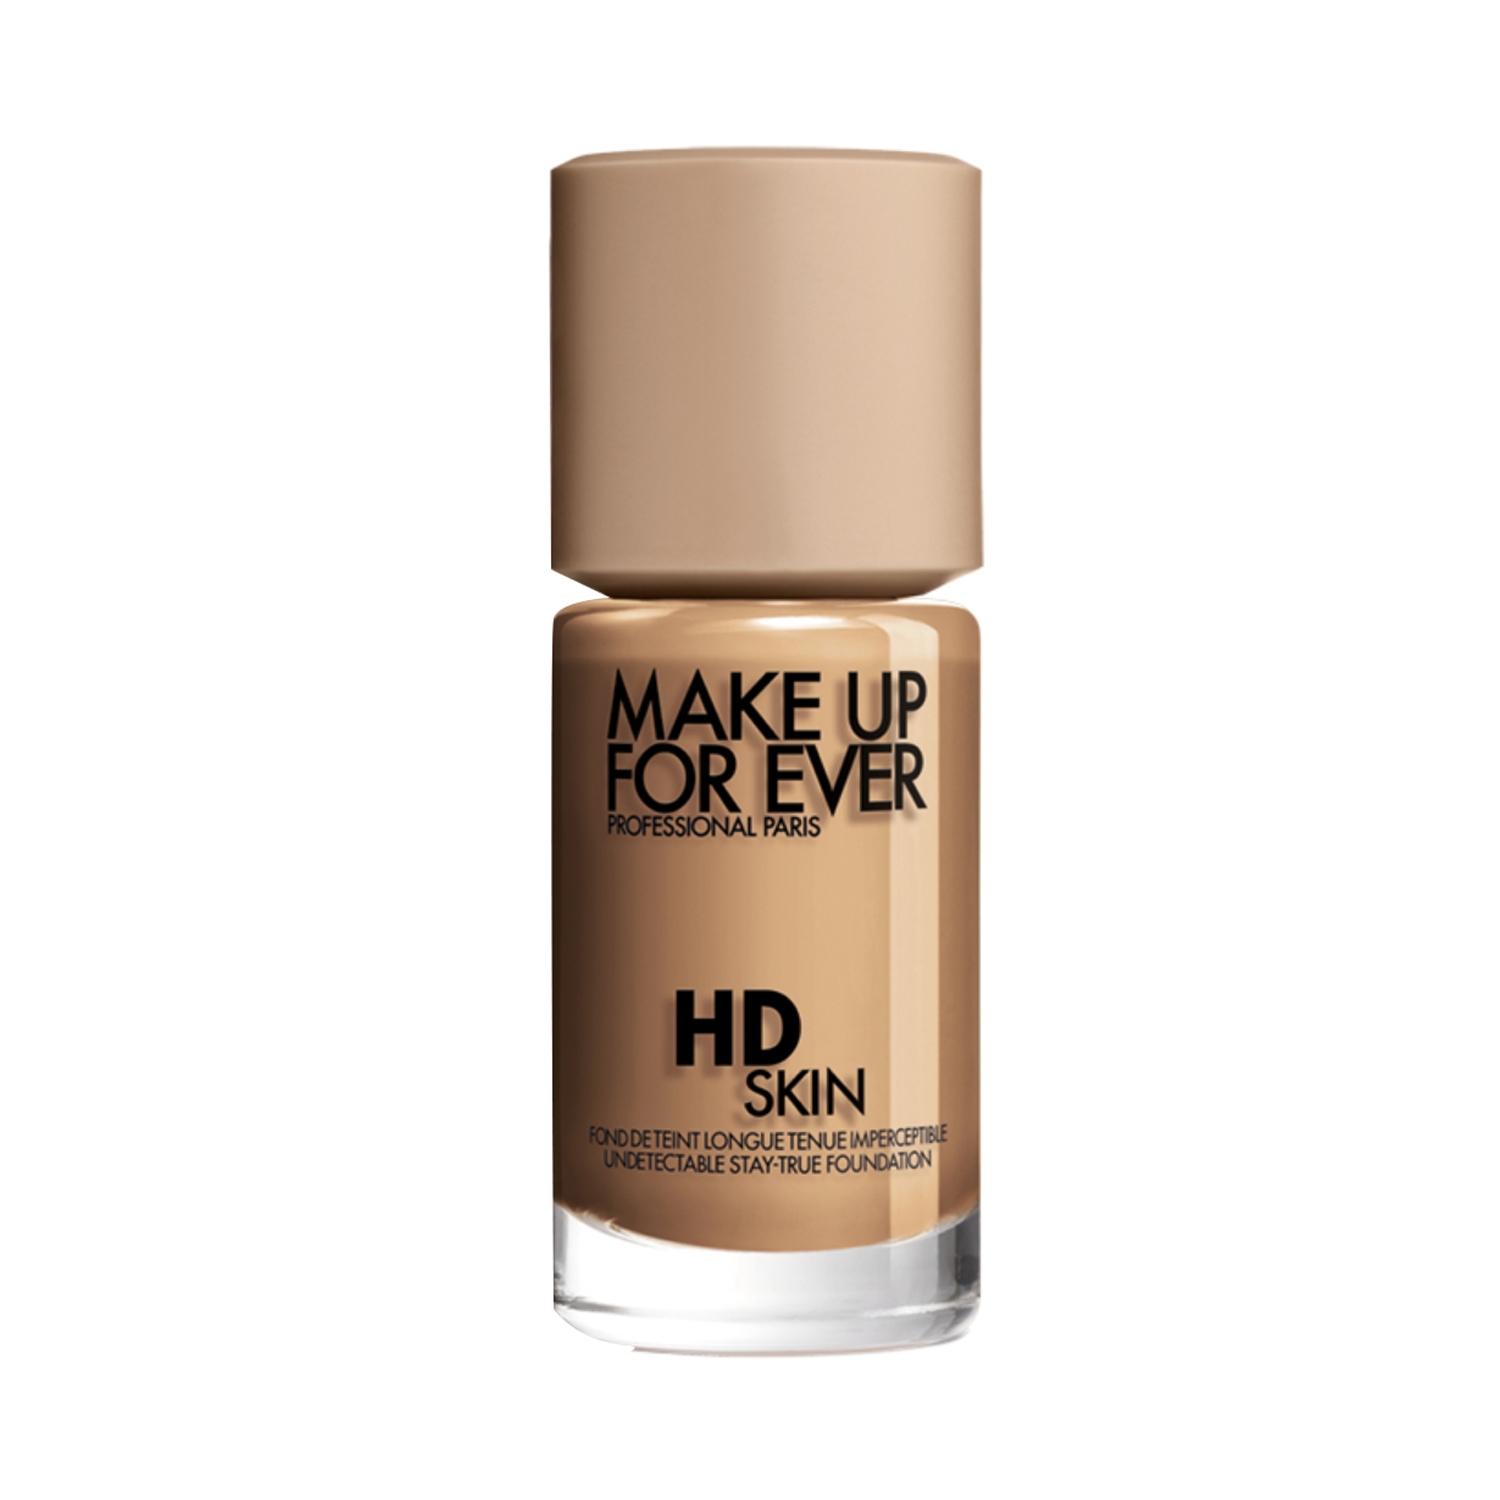 Make Up For Ever | Make Up For Ever Hd Skin Foundation-3N42 (Y415) (30ml)